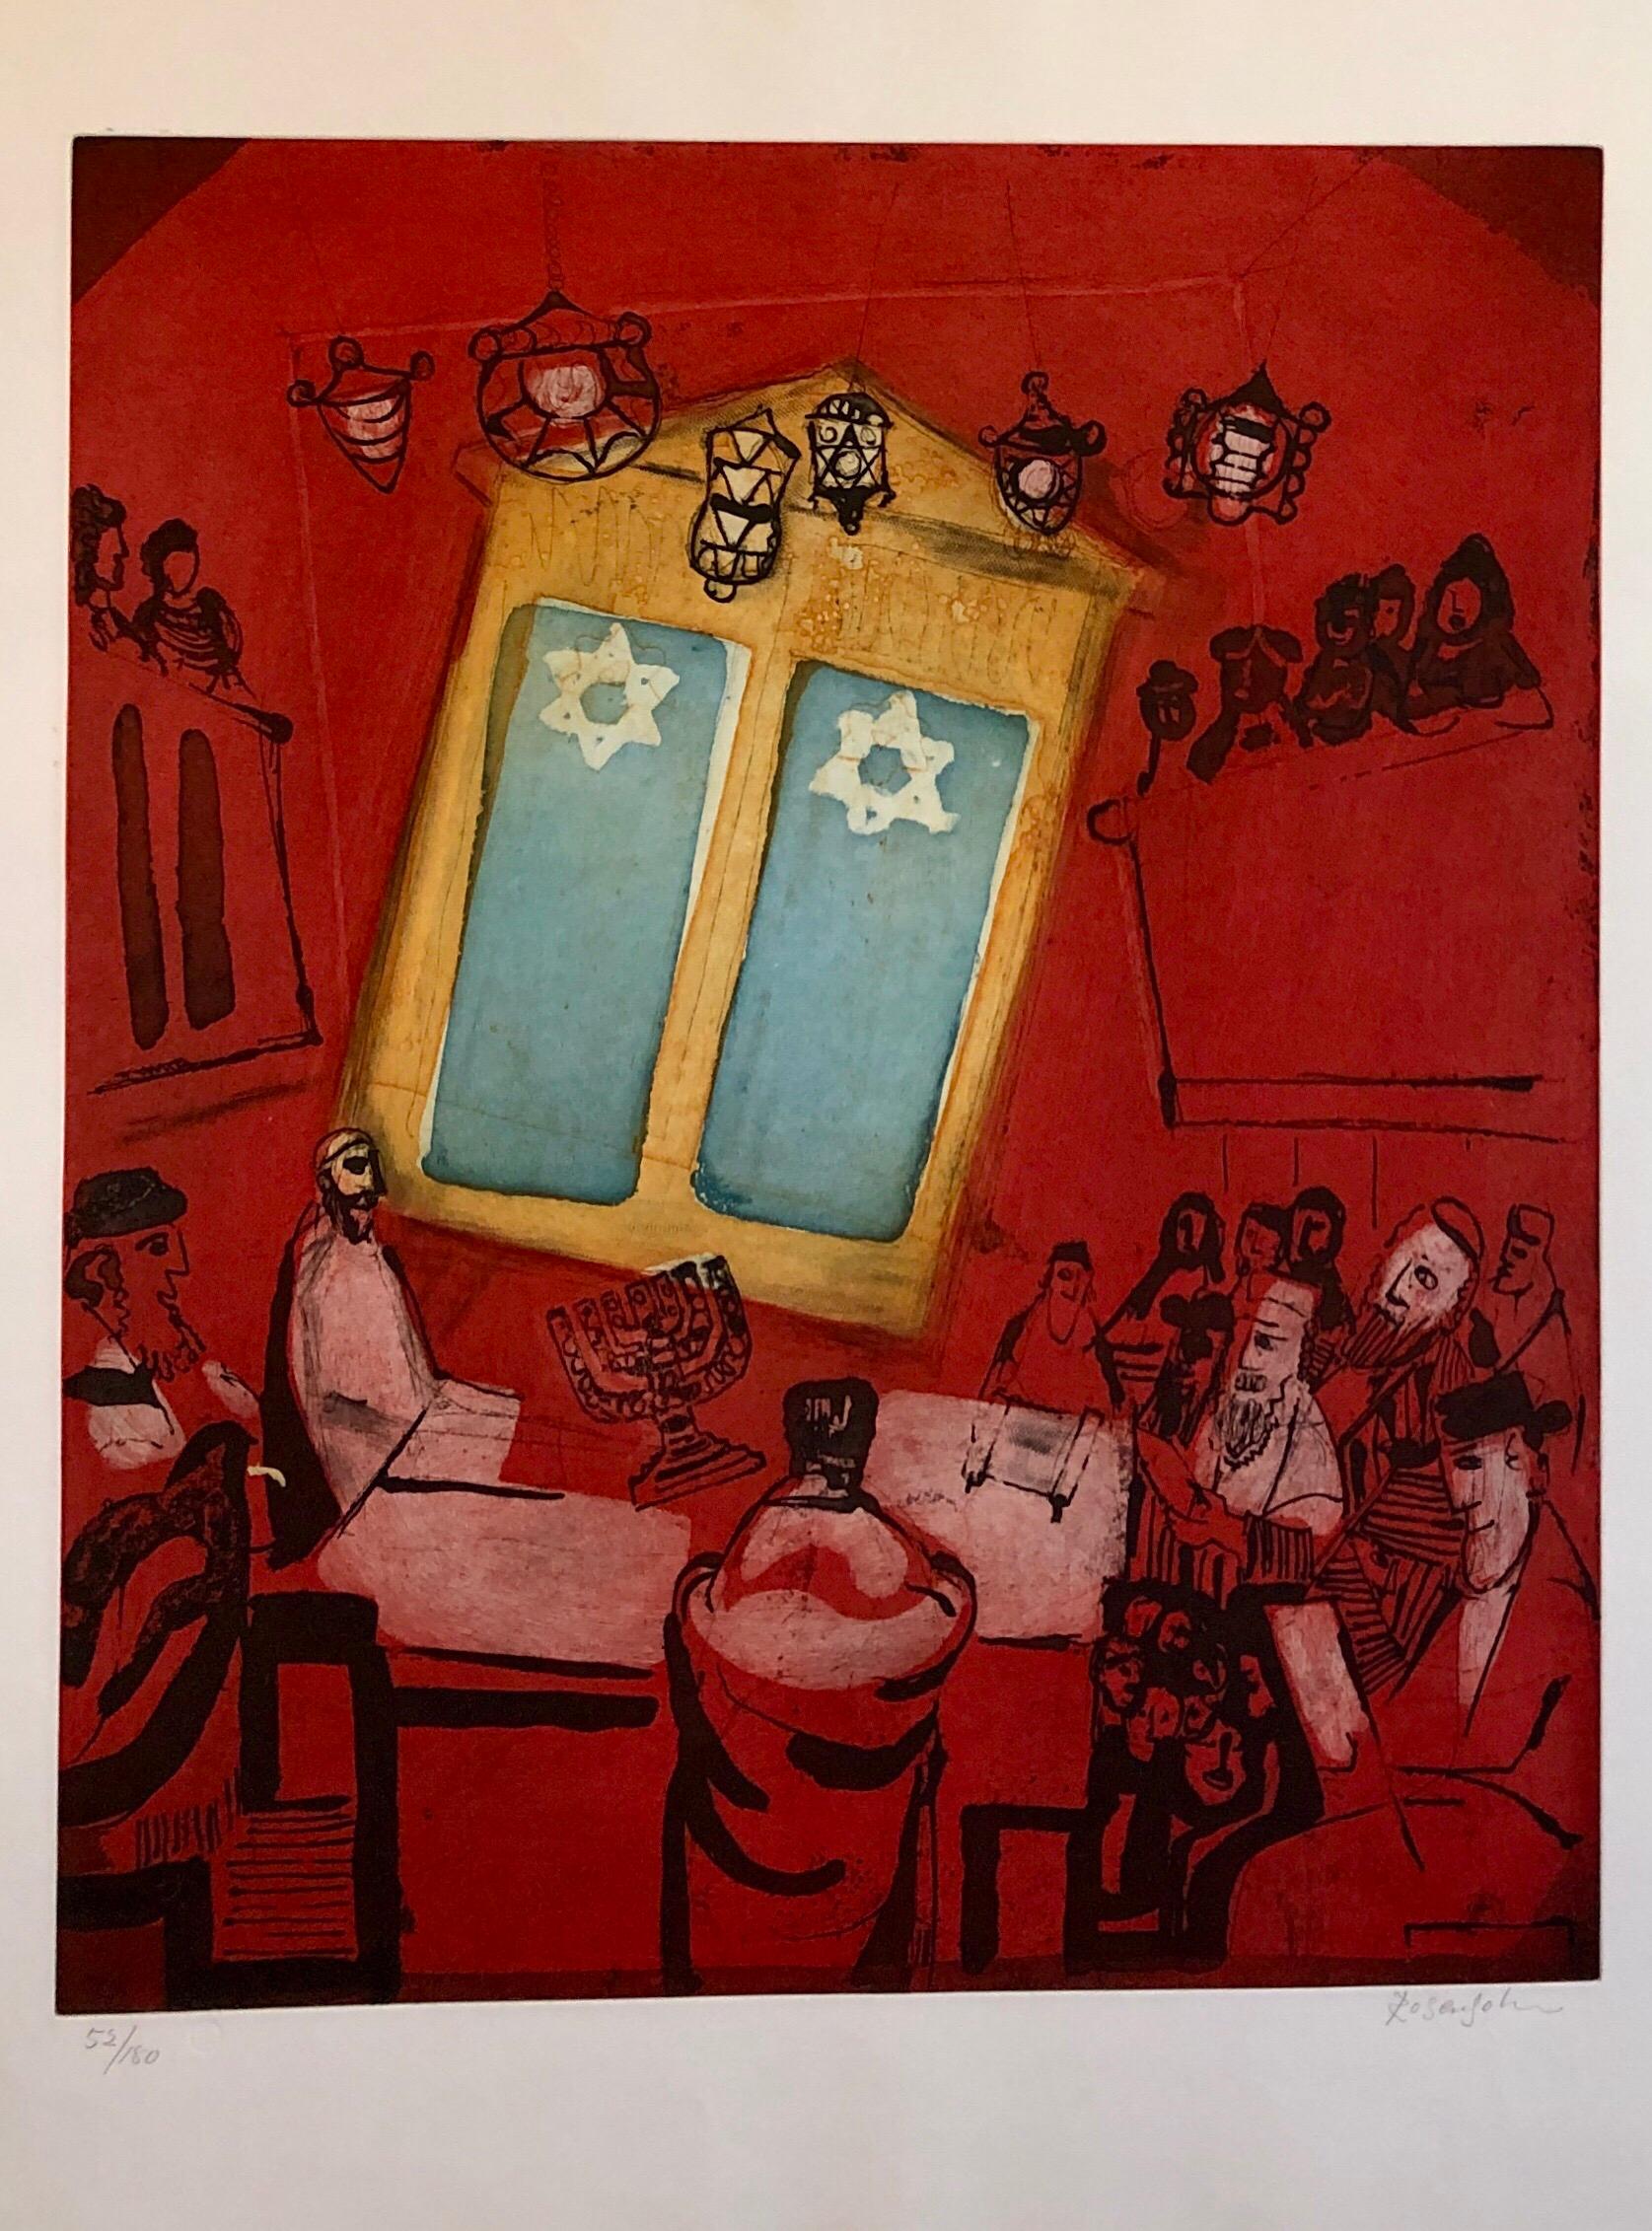 Swedish Jewish modern art. On Hahnemuhle paper, hand signed and numbered. poster is not included.
These depict synagogue interiors, Rabbis at prayer etc. Judaic religious events.
Mauritz Lennart Rosensohn , born July 25, 1918 in Malmö, Denmark, died